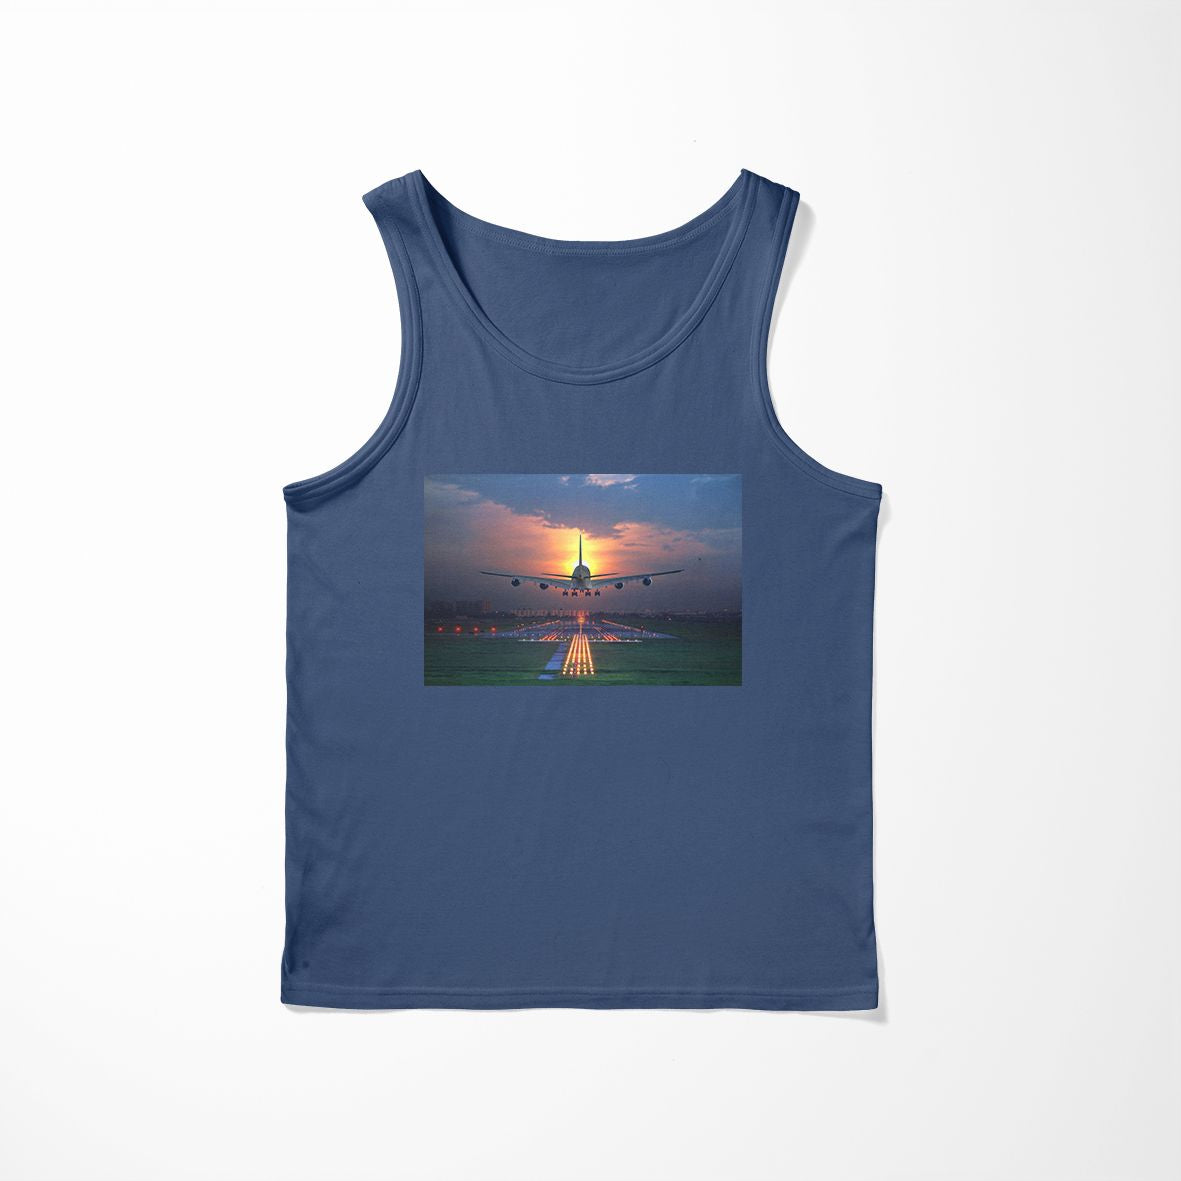 Super Airbus A380 Landing During Sunset Designed Tank Tops